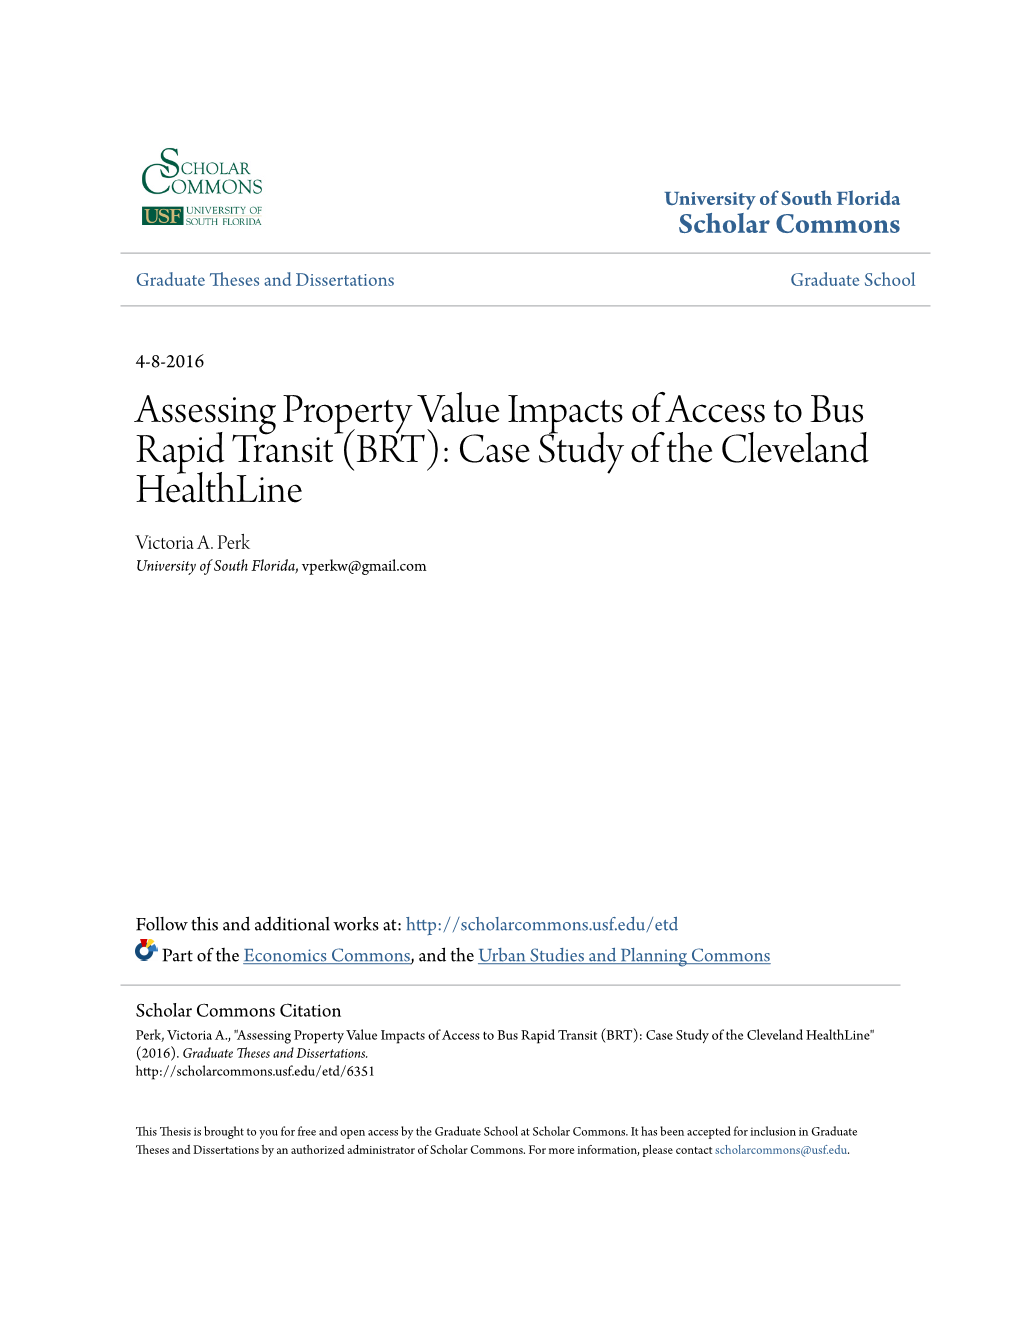 Assessing Property Value Impacts of Access to Bus Rapid Transit (BRT): Case Study of the Cleveland Healthline Victoria A